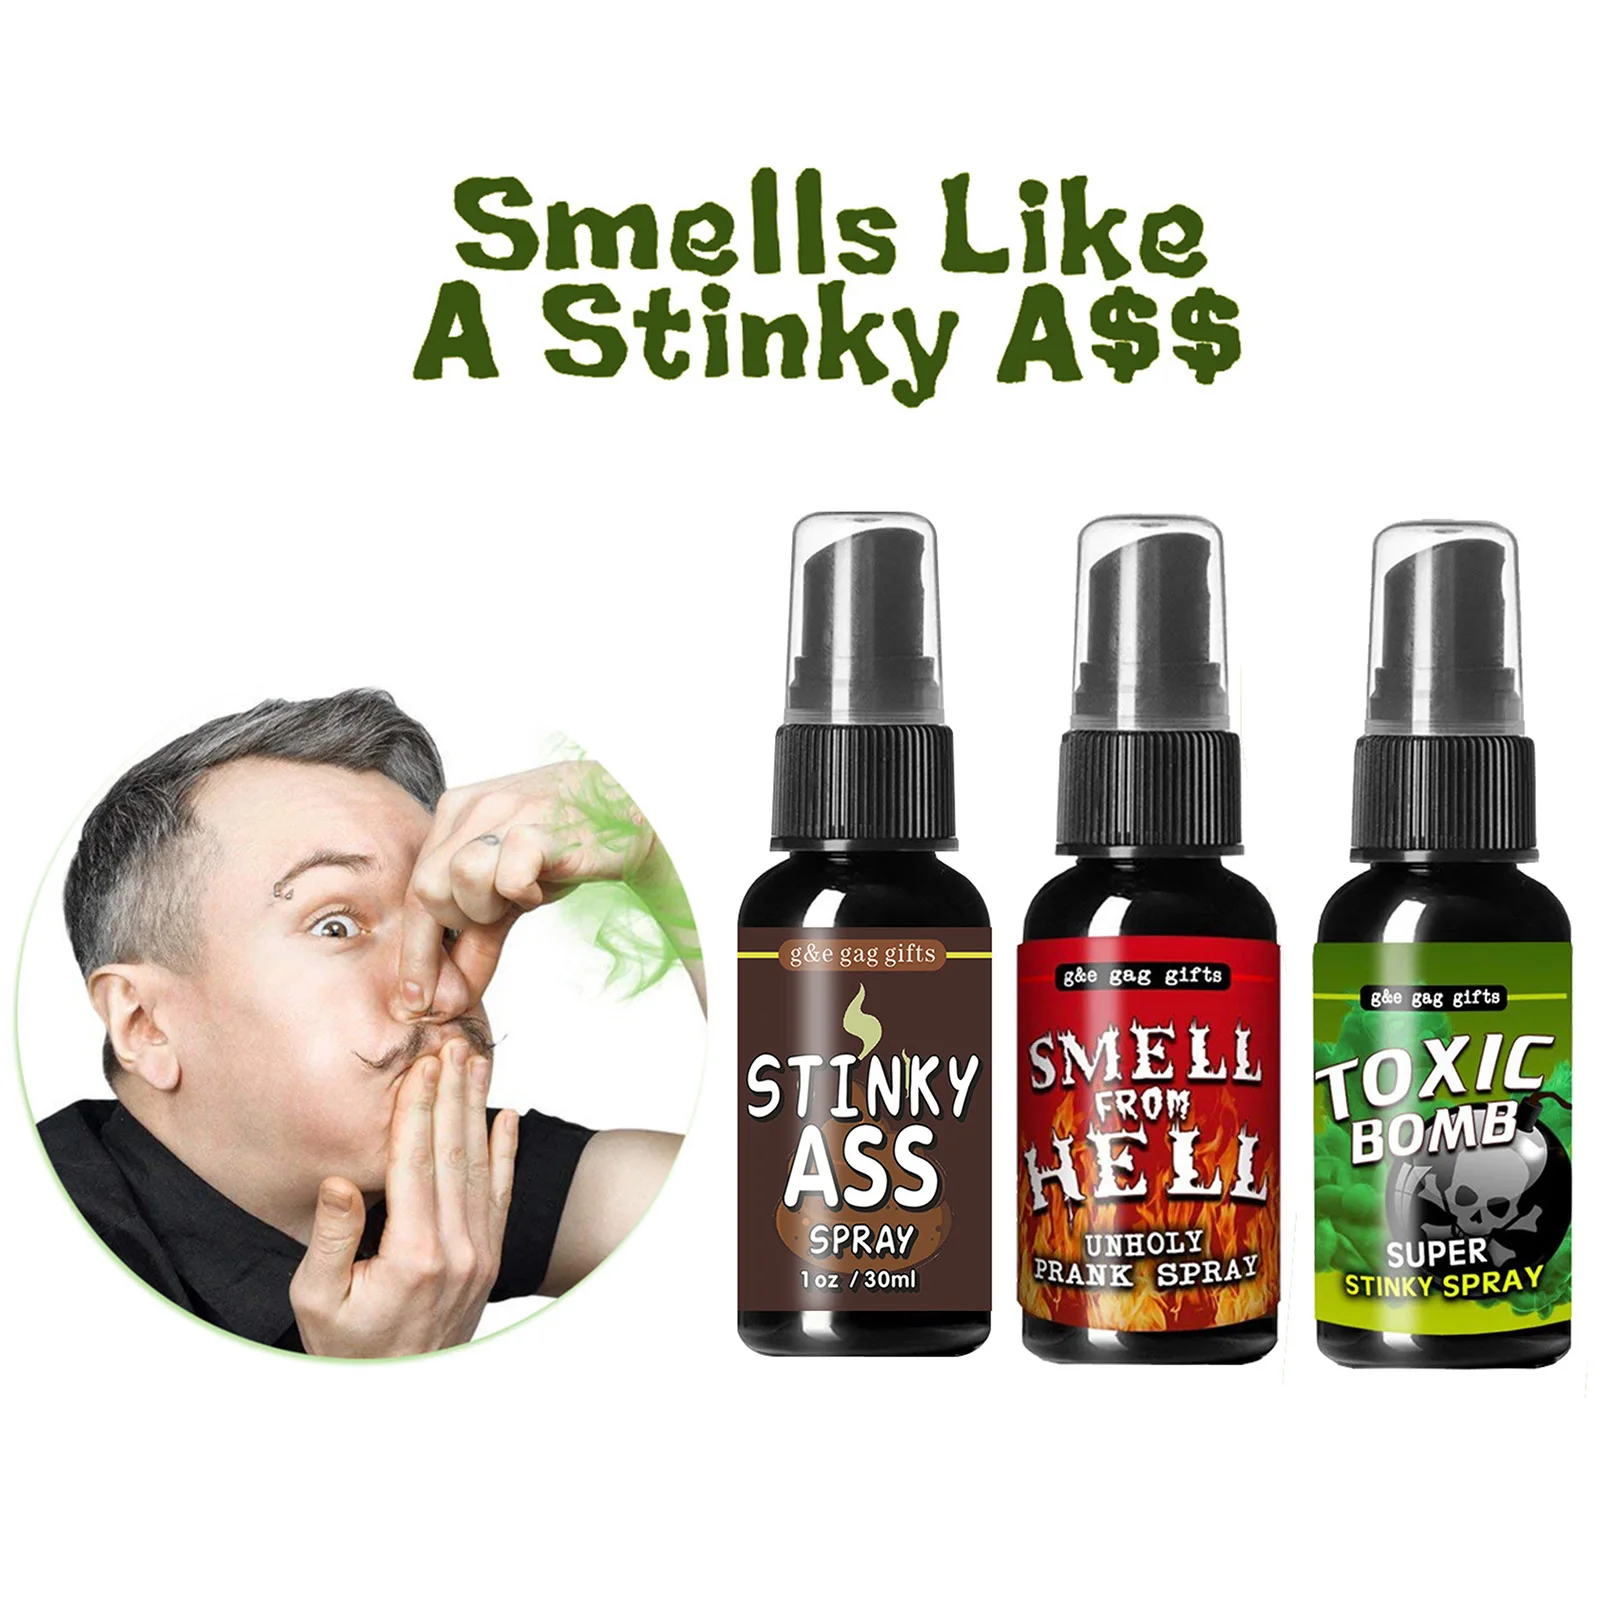 2022 Funny Tricky Prank Toy Liquid Fart Gag Prank Joke Spray Can Smelly Stinky Gas for Party kids Family Entertainment Gift 30ml